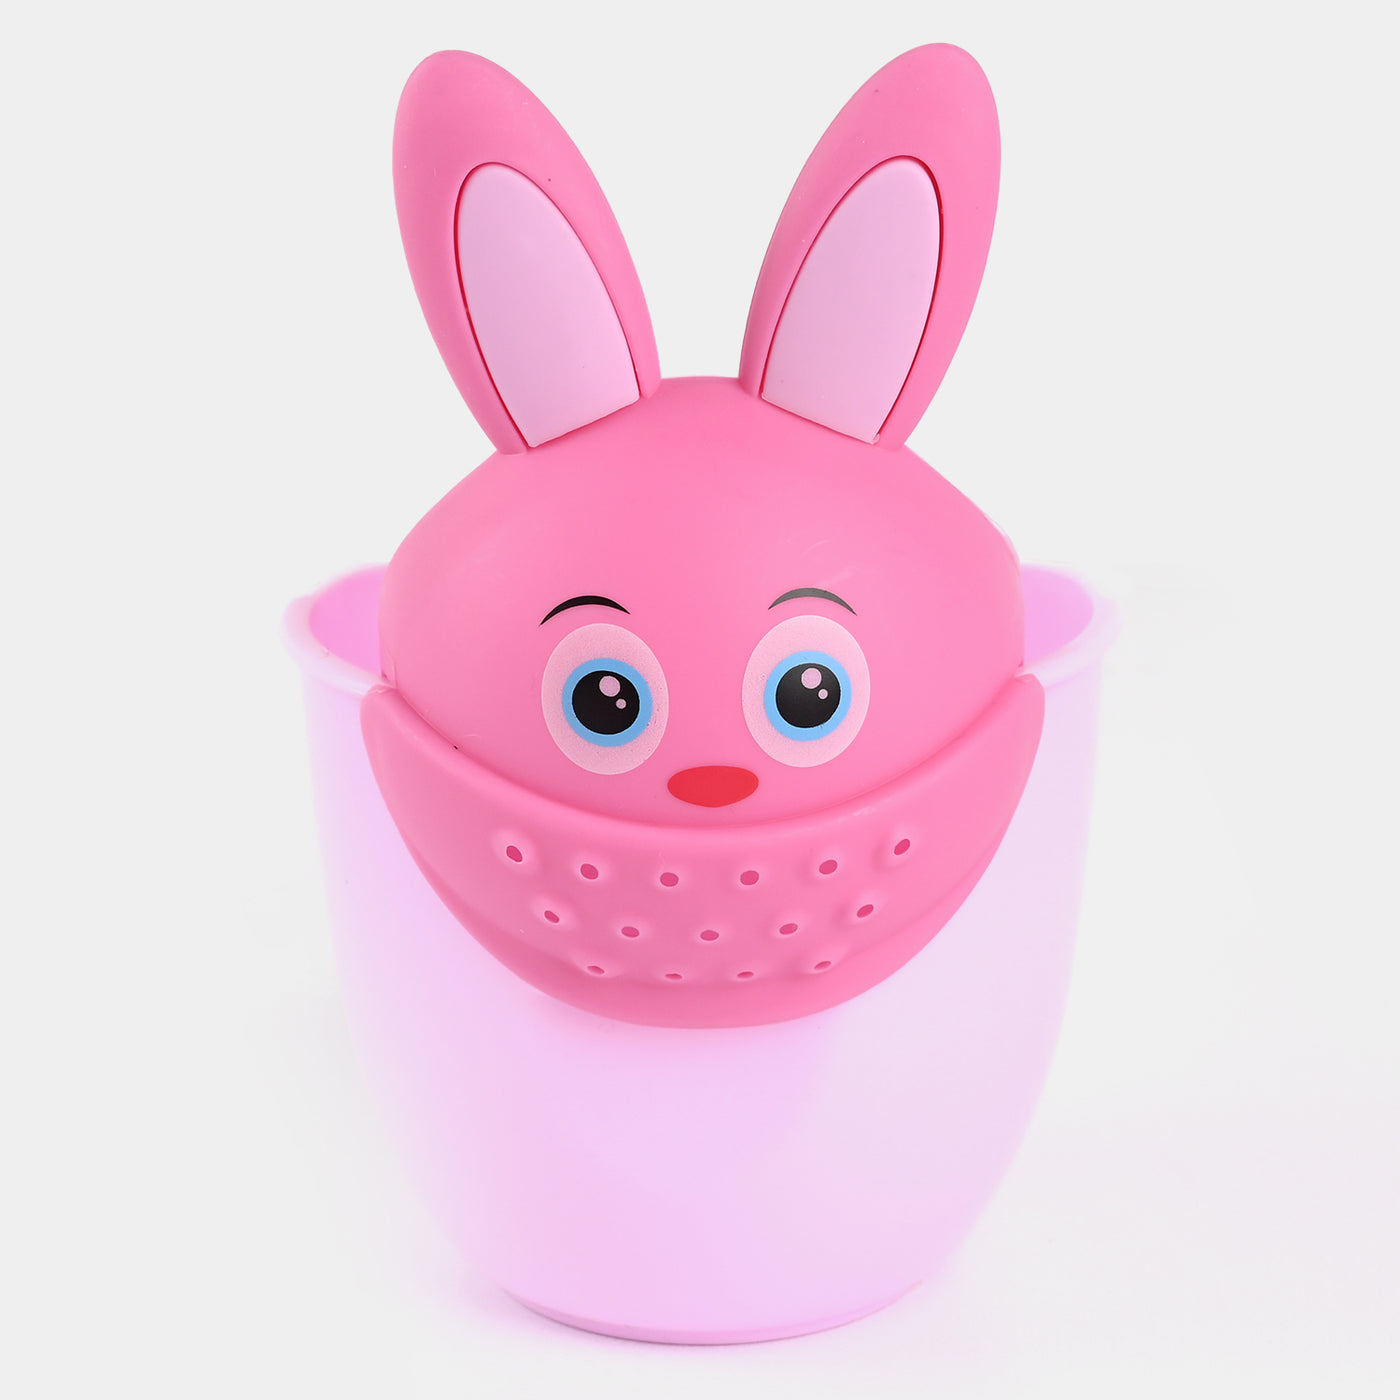 Plastic Cute Design Baby Shower Cup